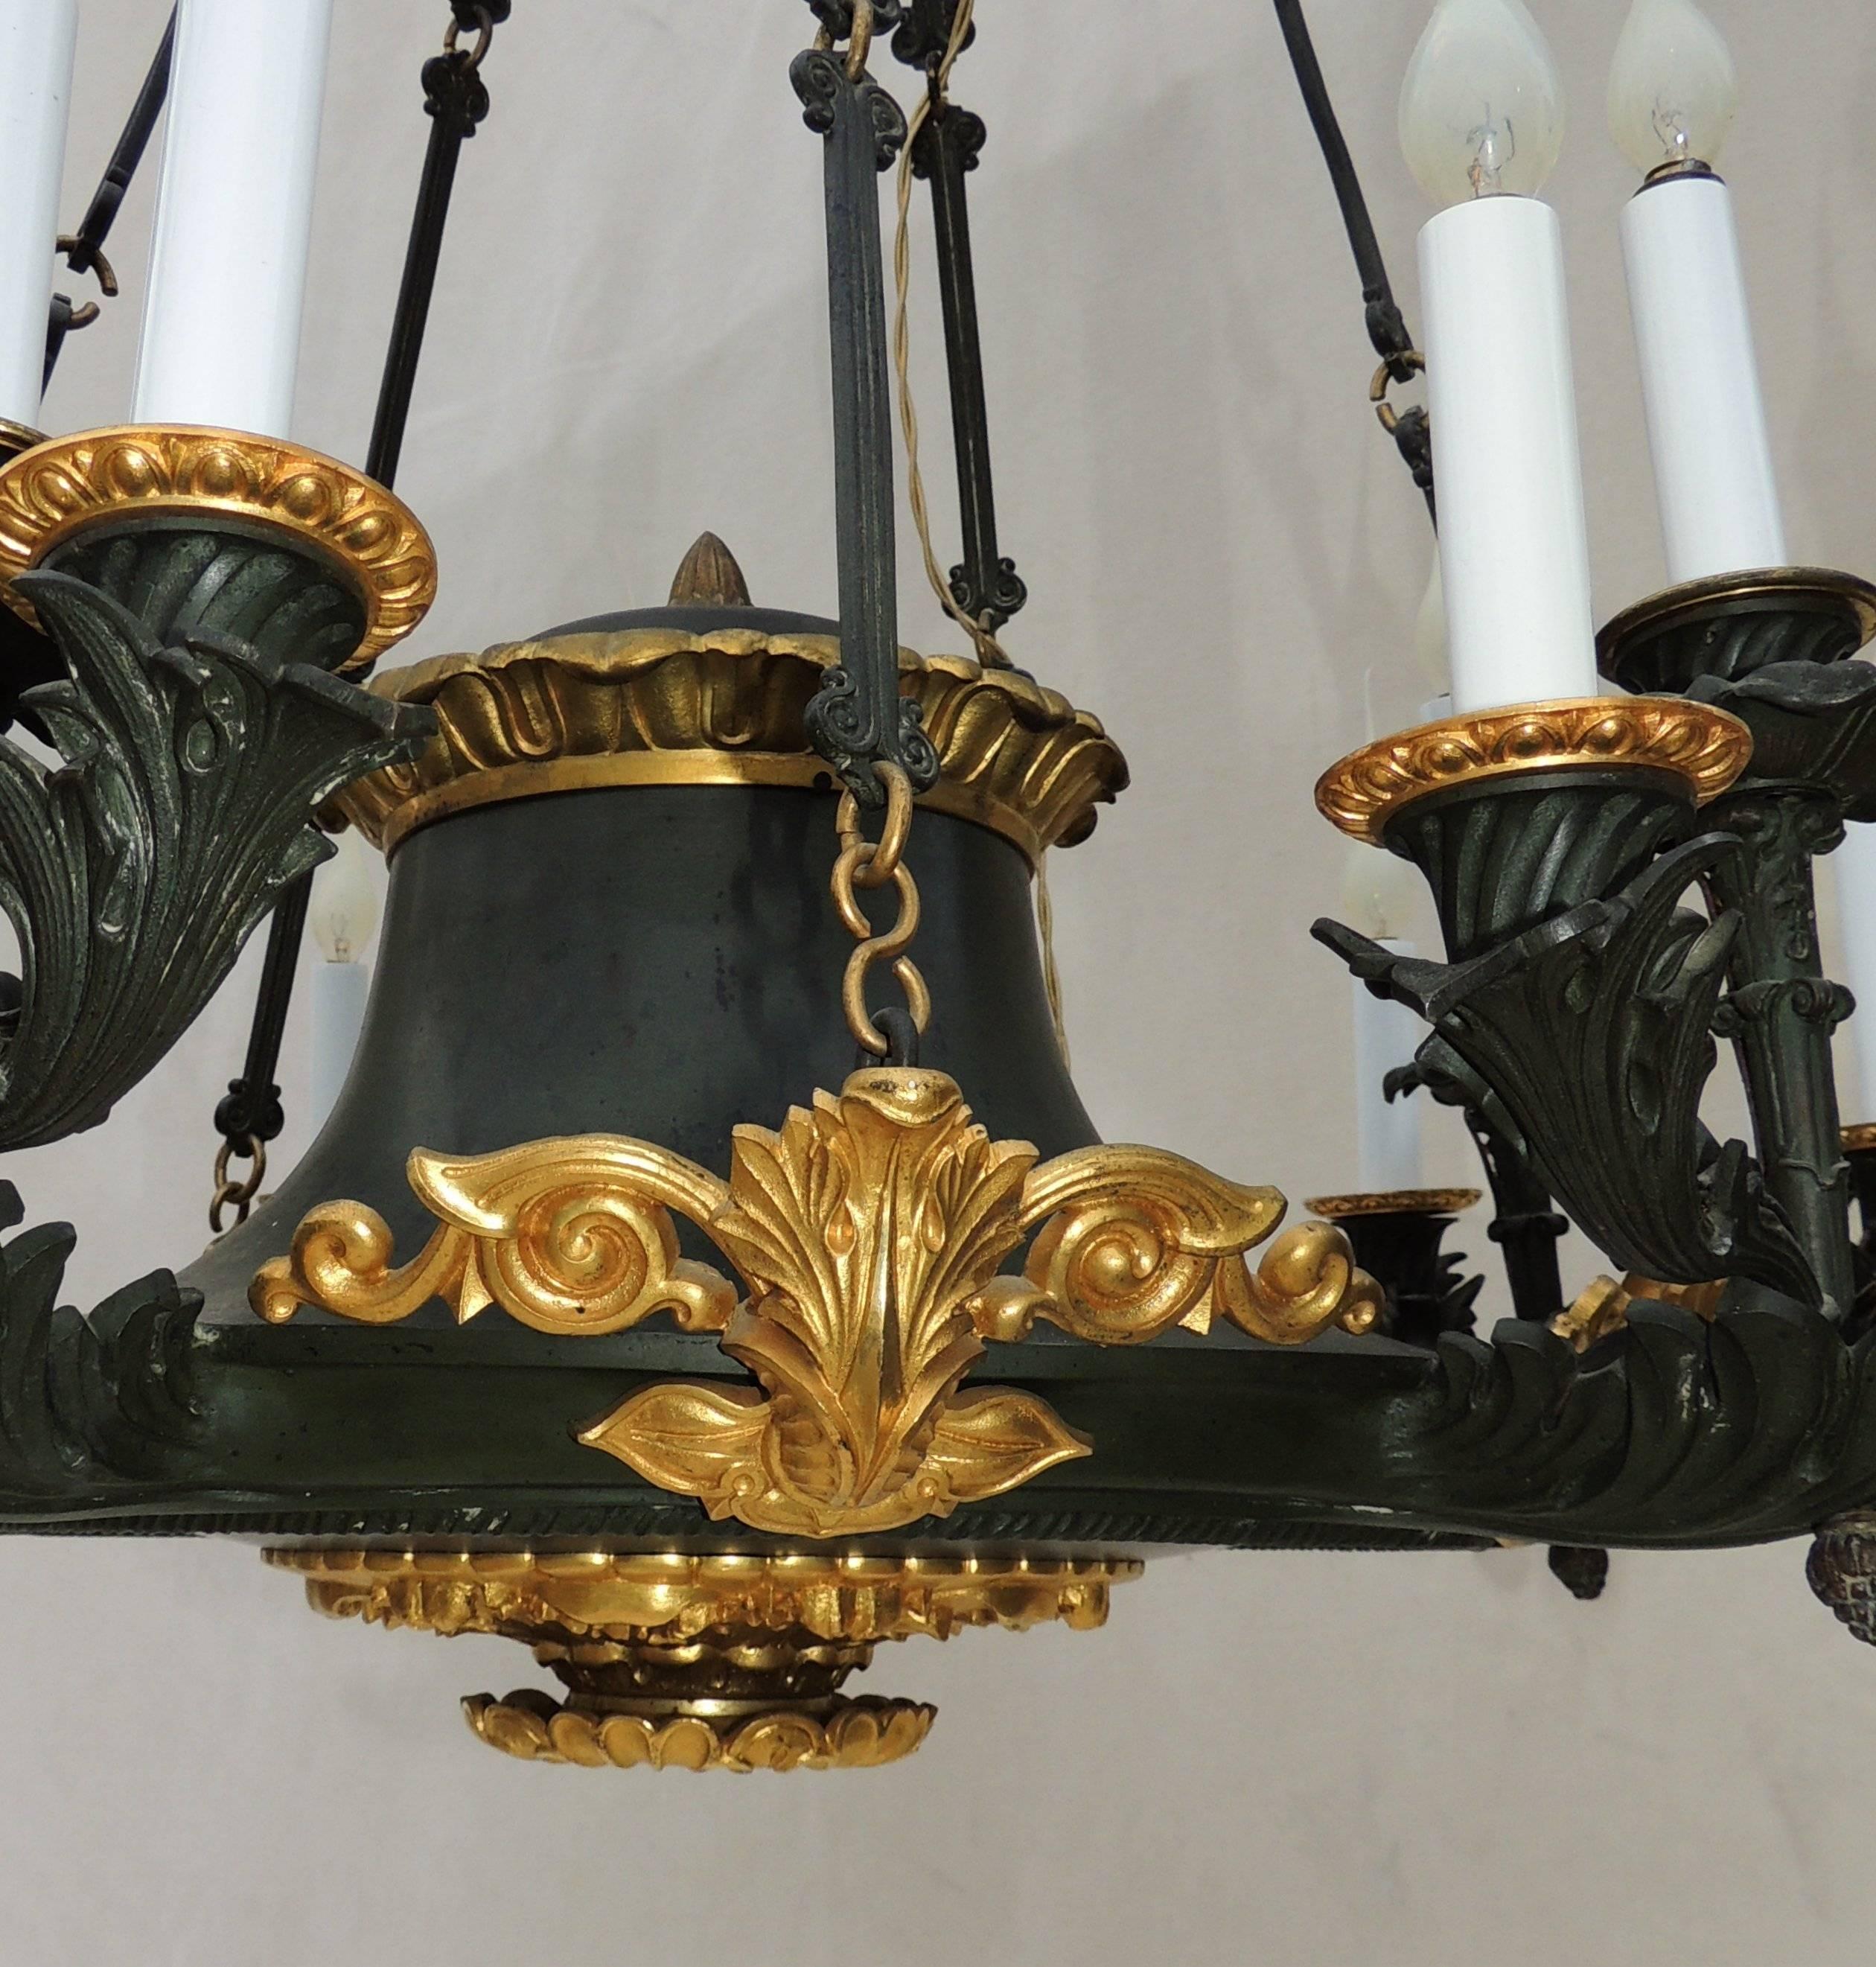 Palatial French Empire Doré Bronze and Patinated Neoclassical Chandelier Fixture For Sale 2